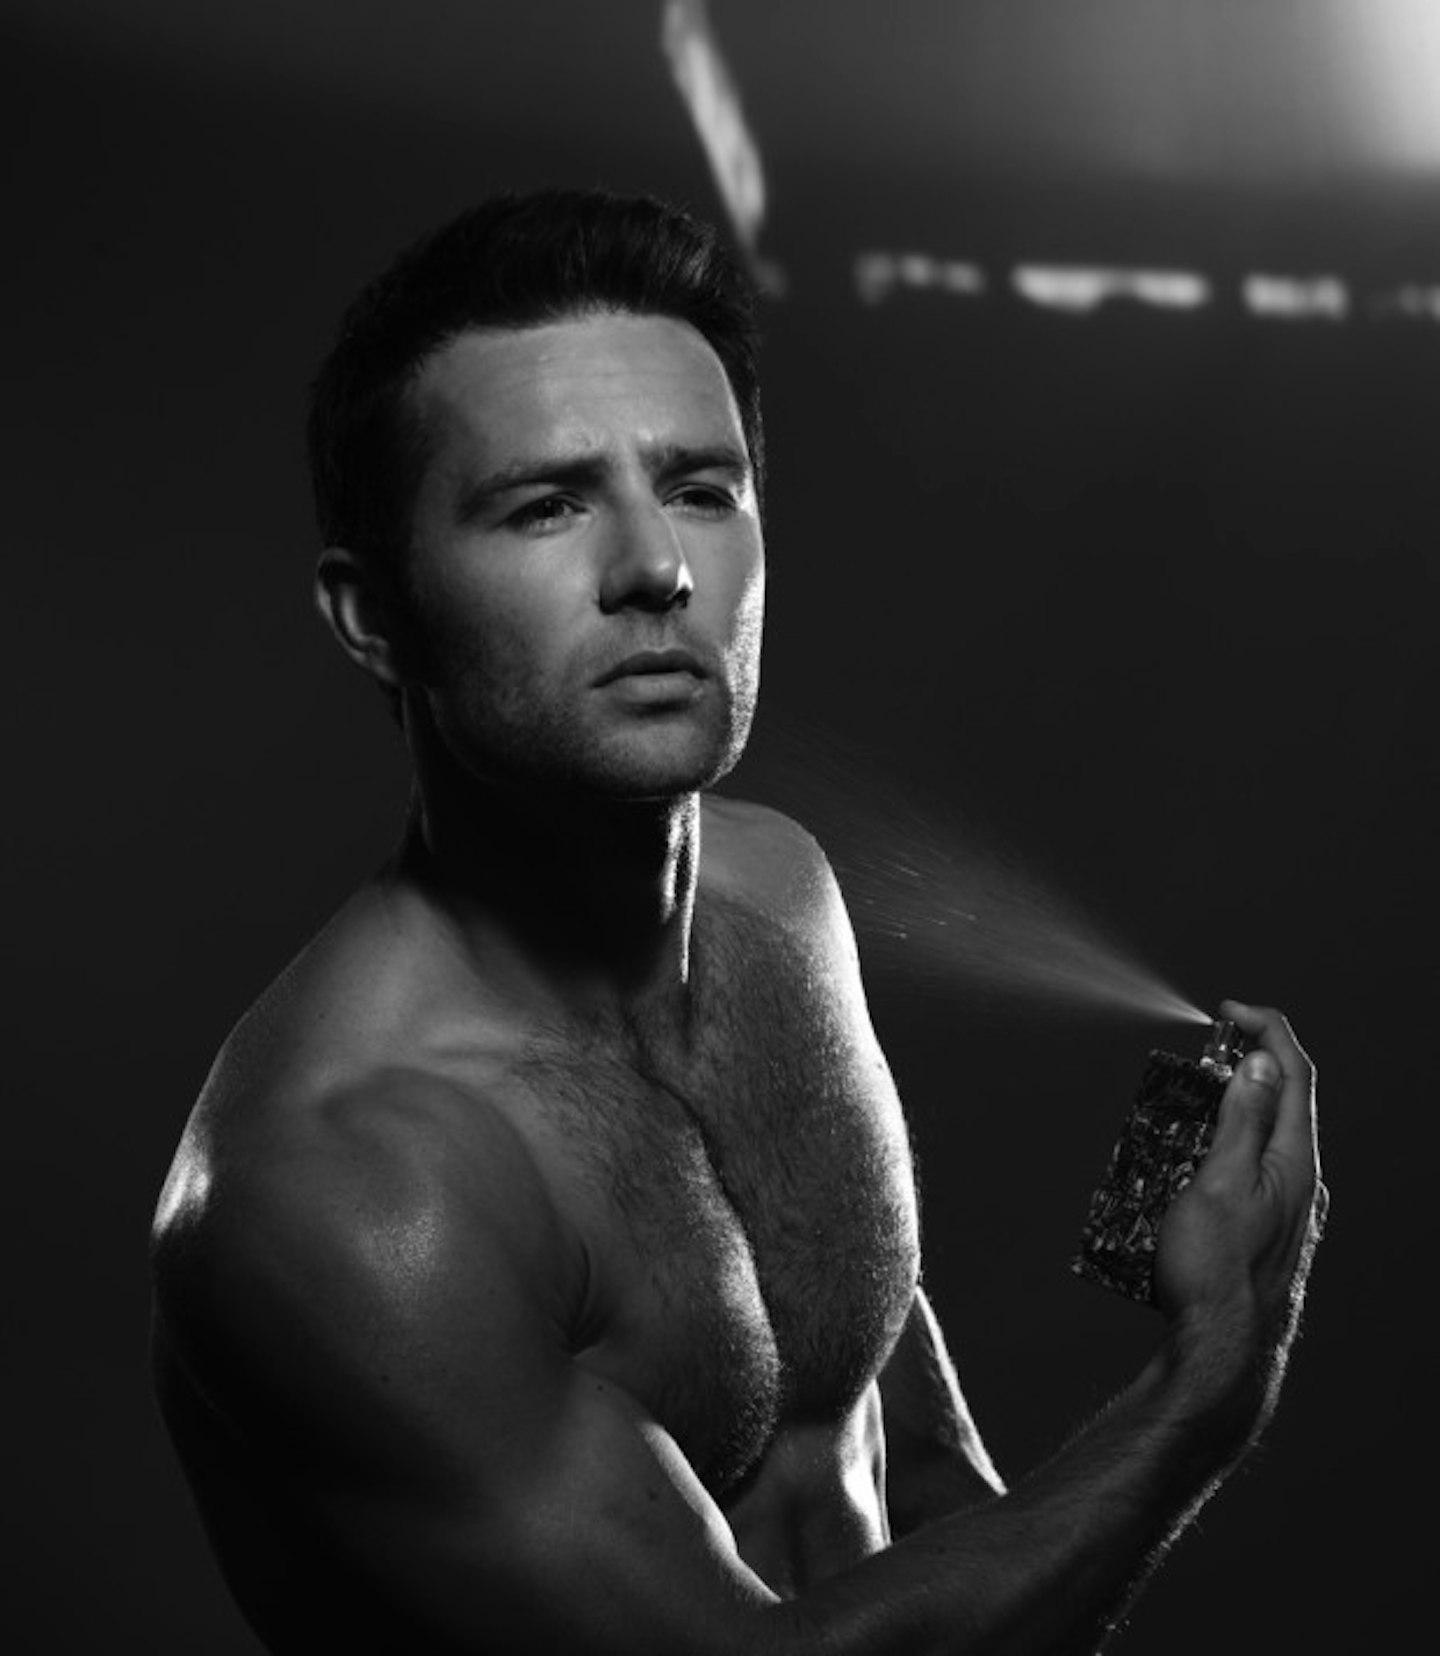 EMBARGOED UNTIL 07.10.15 00.01 Harry Judd teams up with NOW to launch Obleshion, Eau De Walker fragrance ahead of Season 6 of The Walking Dead (3)